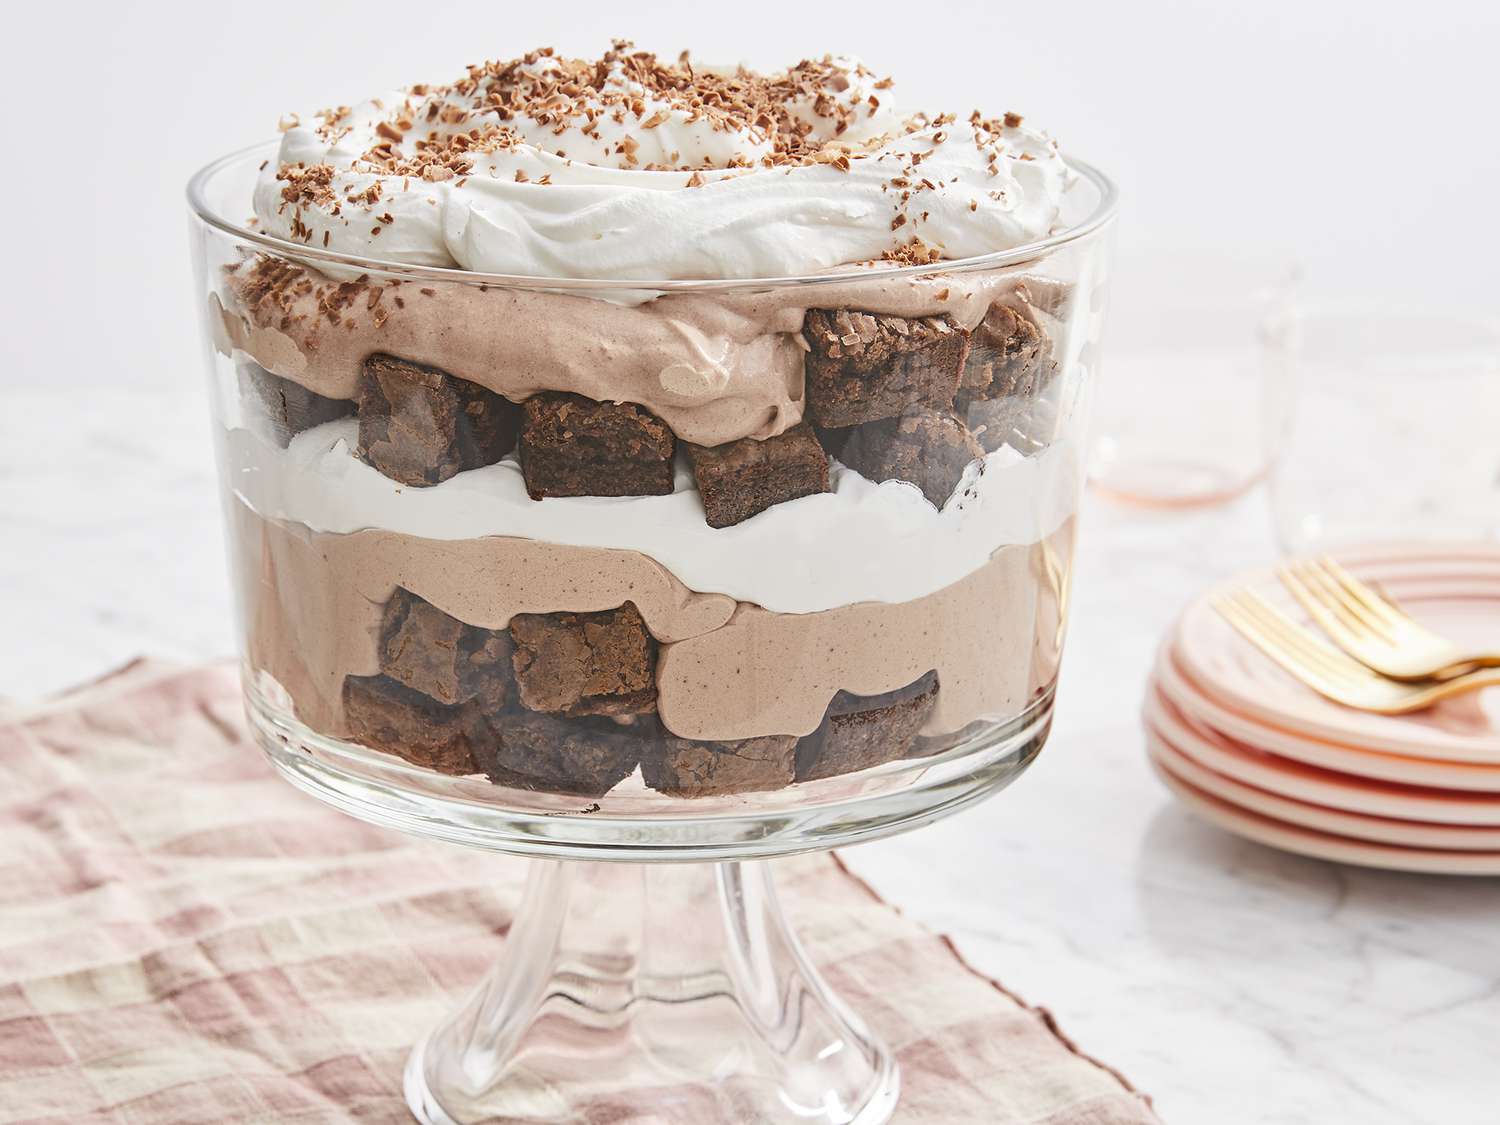 Top 3 Trifle Recipes